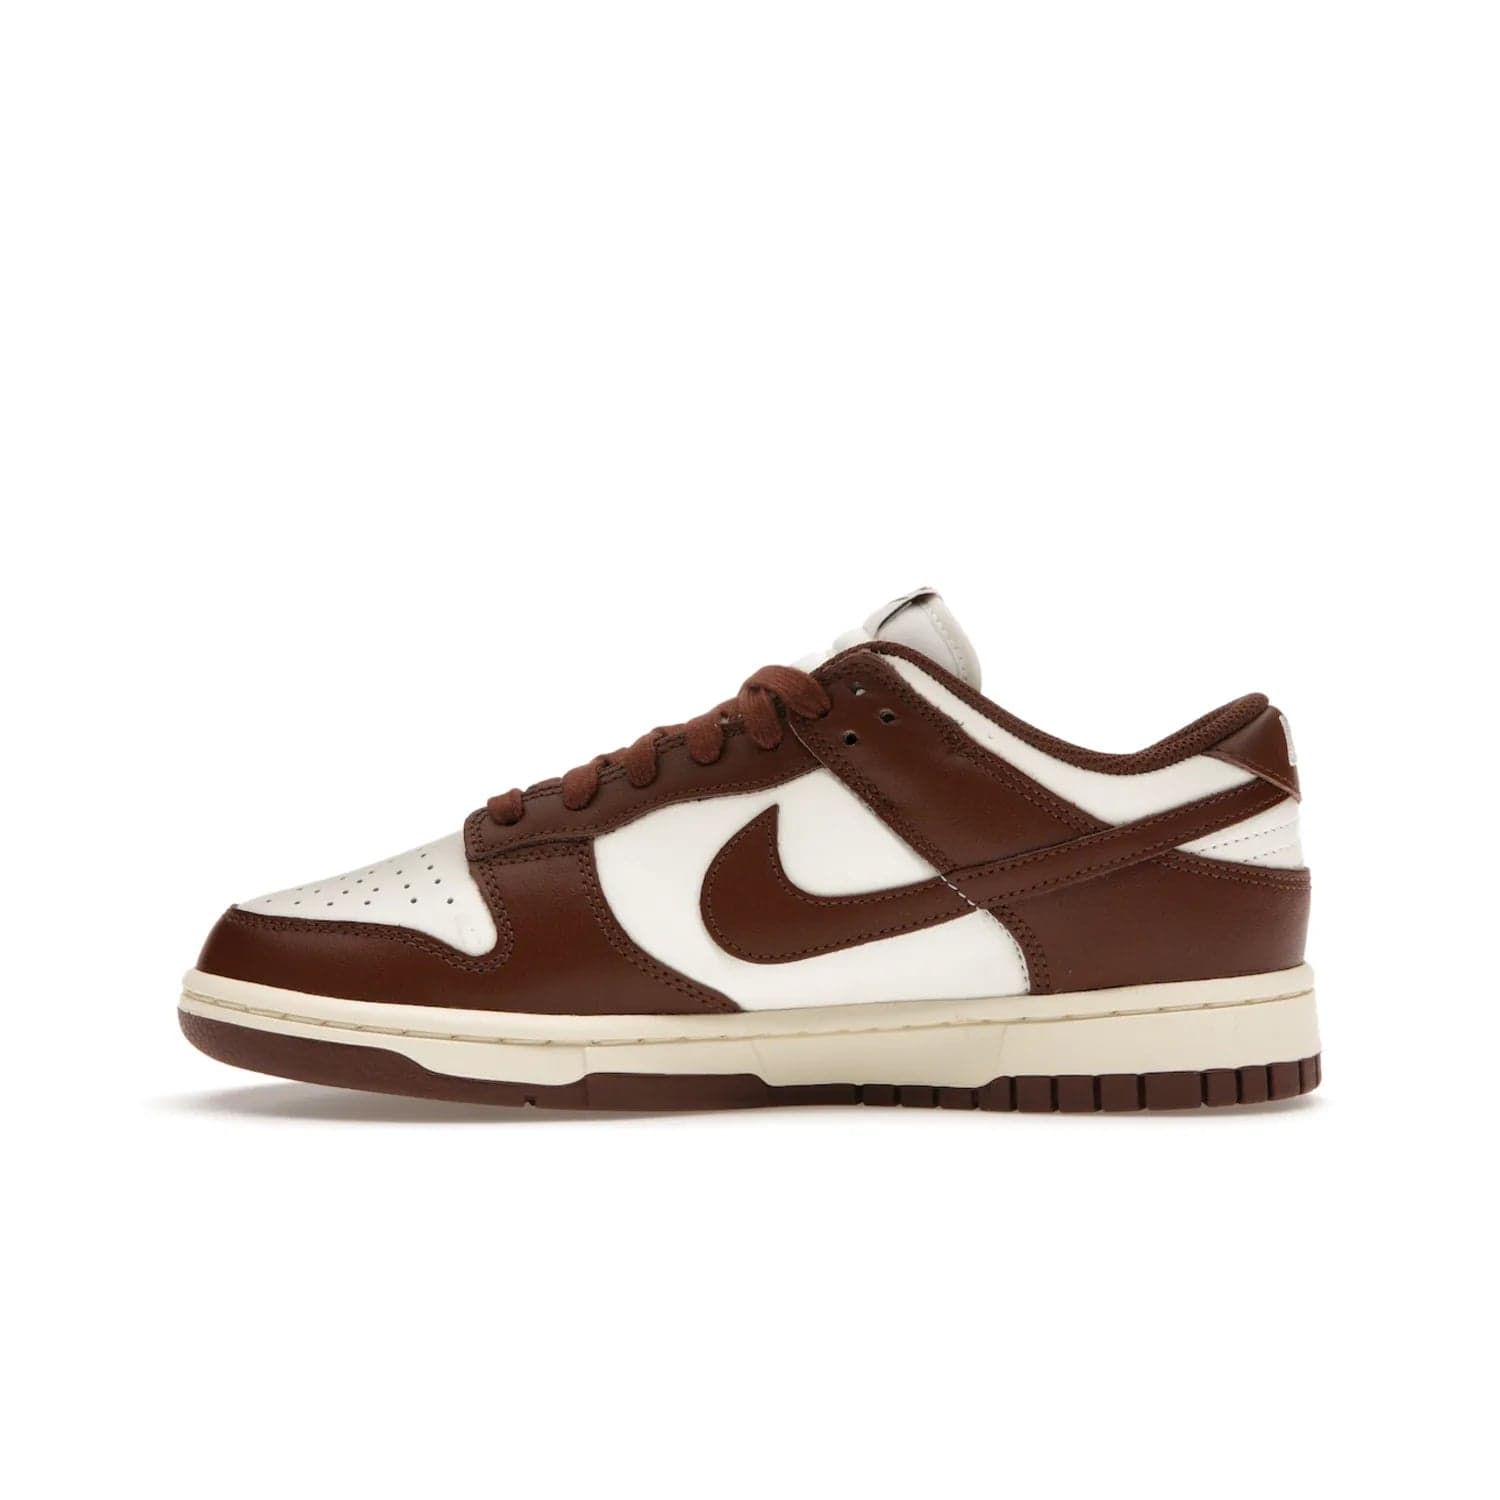 Nike Dunk Low Cacao Wow (Women's) - Image 19 - Only at www.BallersClubKickz.com - Revised
Get the Nike Dunk Low Cacao Wow and make a statement! Plush leather and a cool Cacao Wow finish bring together a unique mix of comfort and fashion that will turn heads. Boosted with a Coconut Milk hue. Shop today.